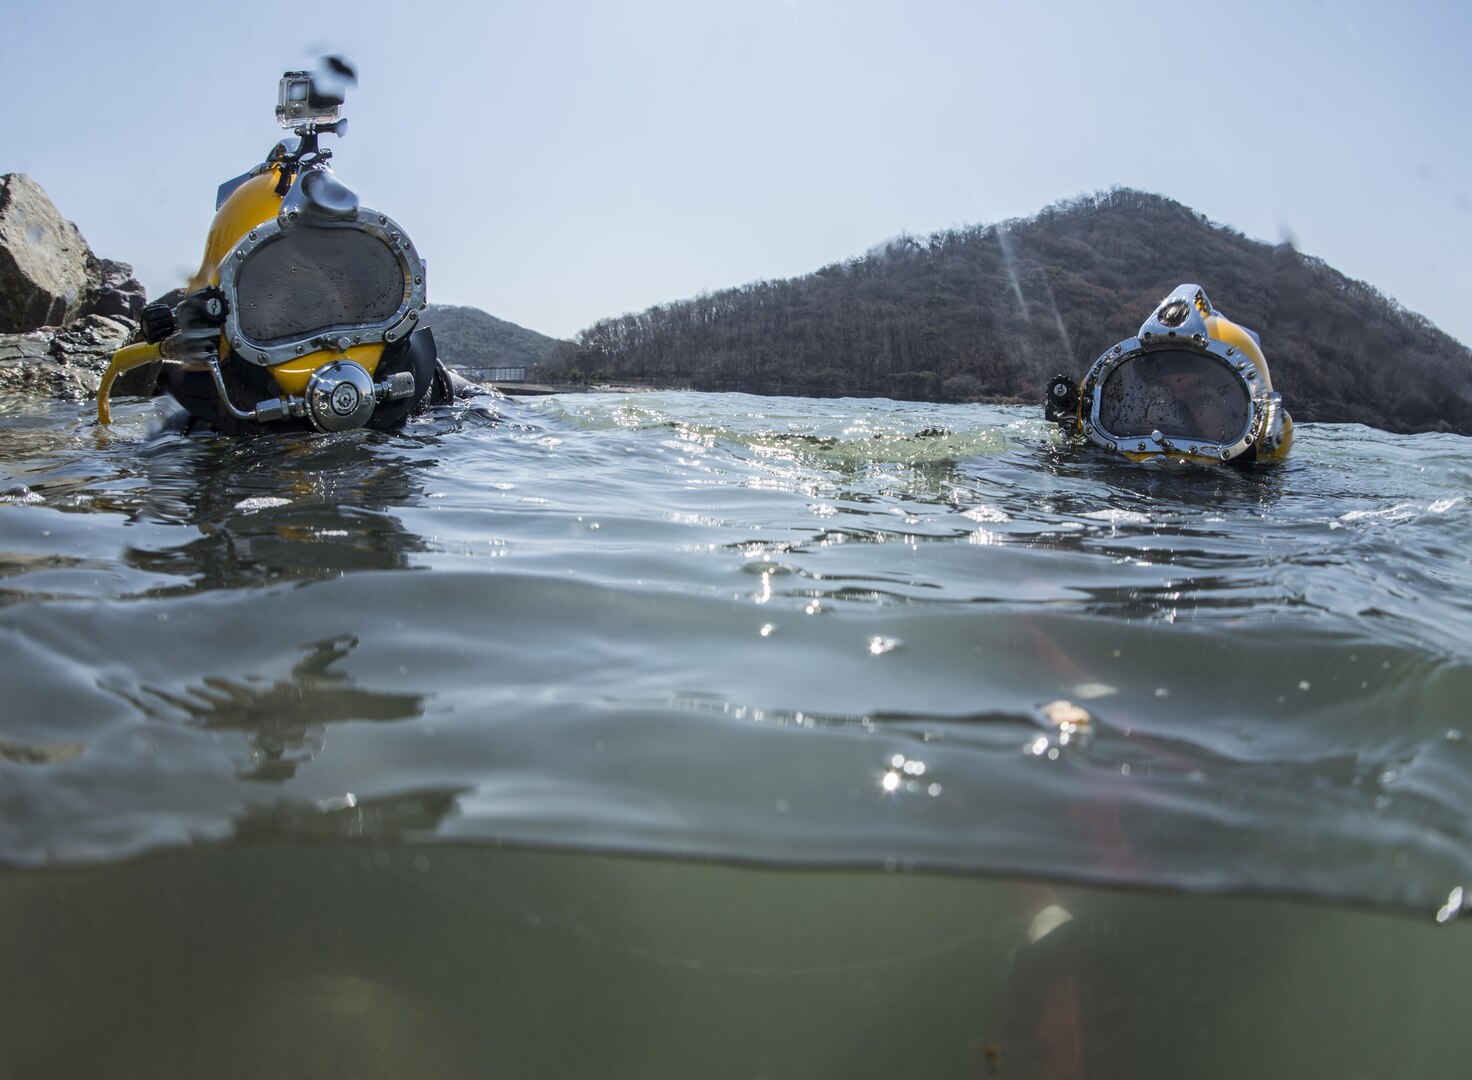 U.S. Navy Lt. Christopher Ferguson, right, and South Korean Chief Petty Officer Dong Soon-jung exit the water after working on a simulated expeditionary wharf during Exercise Foal Eagle 2016 at Chinhae, South Korea, March 10, 2016. Navy photo by Petty Officer 1st Class Charles E. White